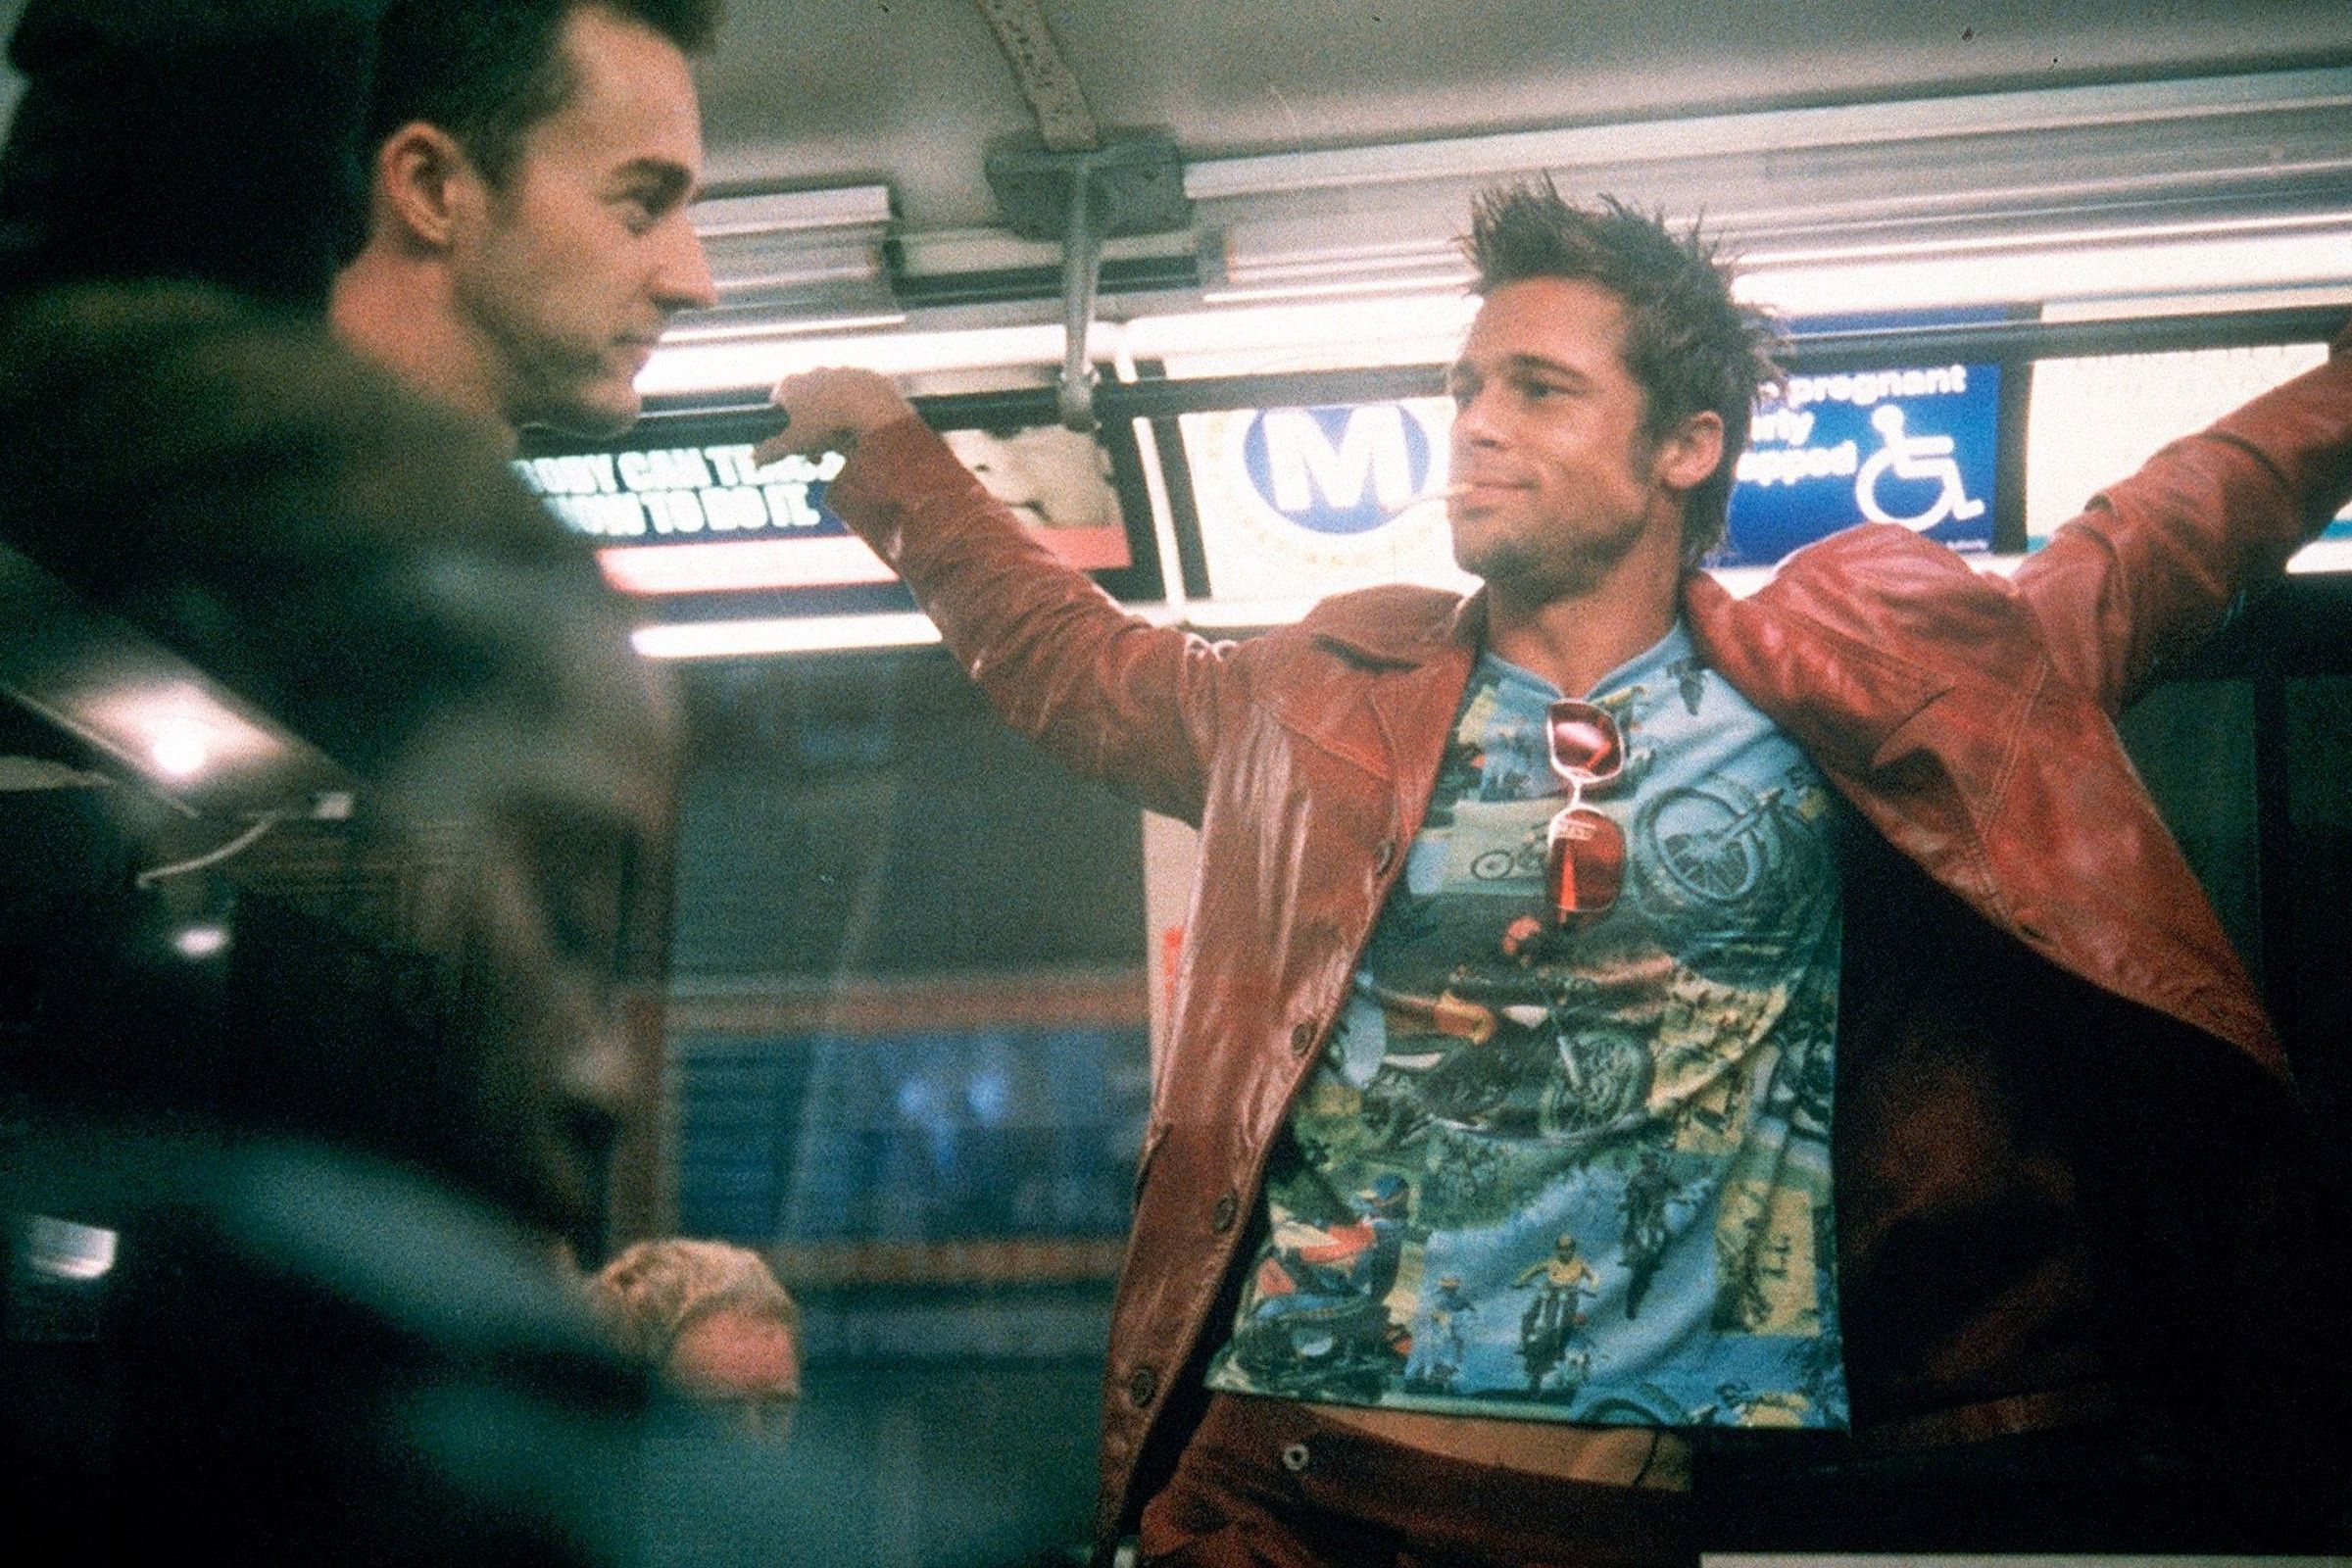 Brad Pitt's aloha attire in Fight Club will see you through the